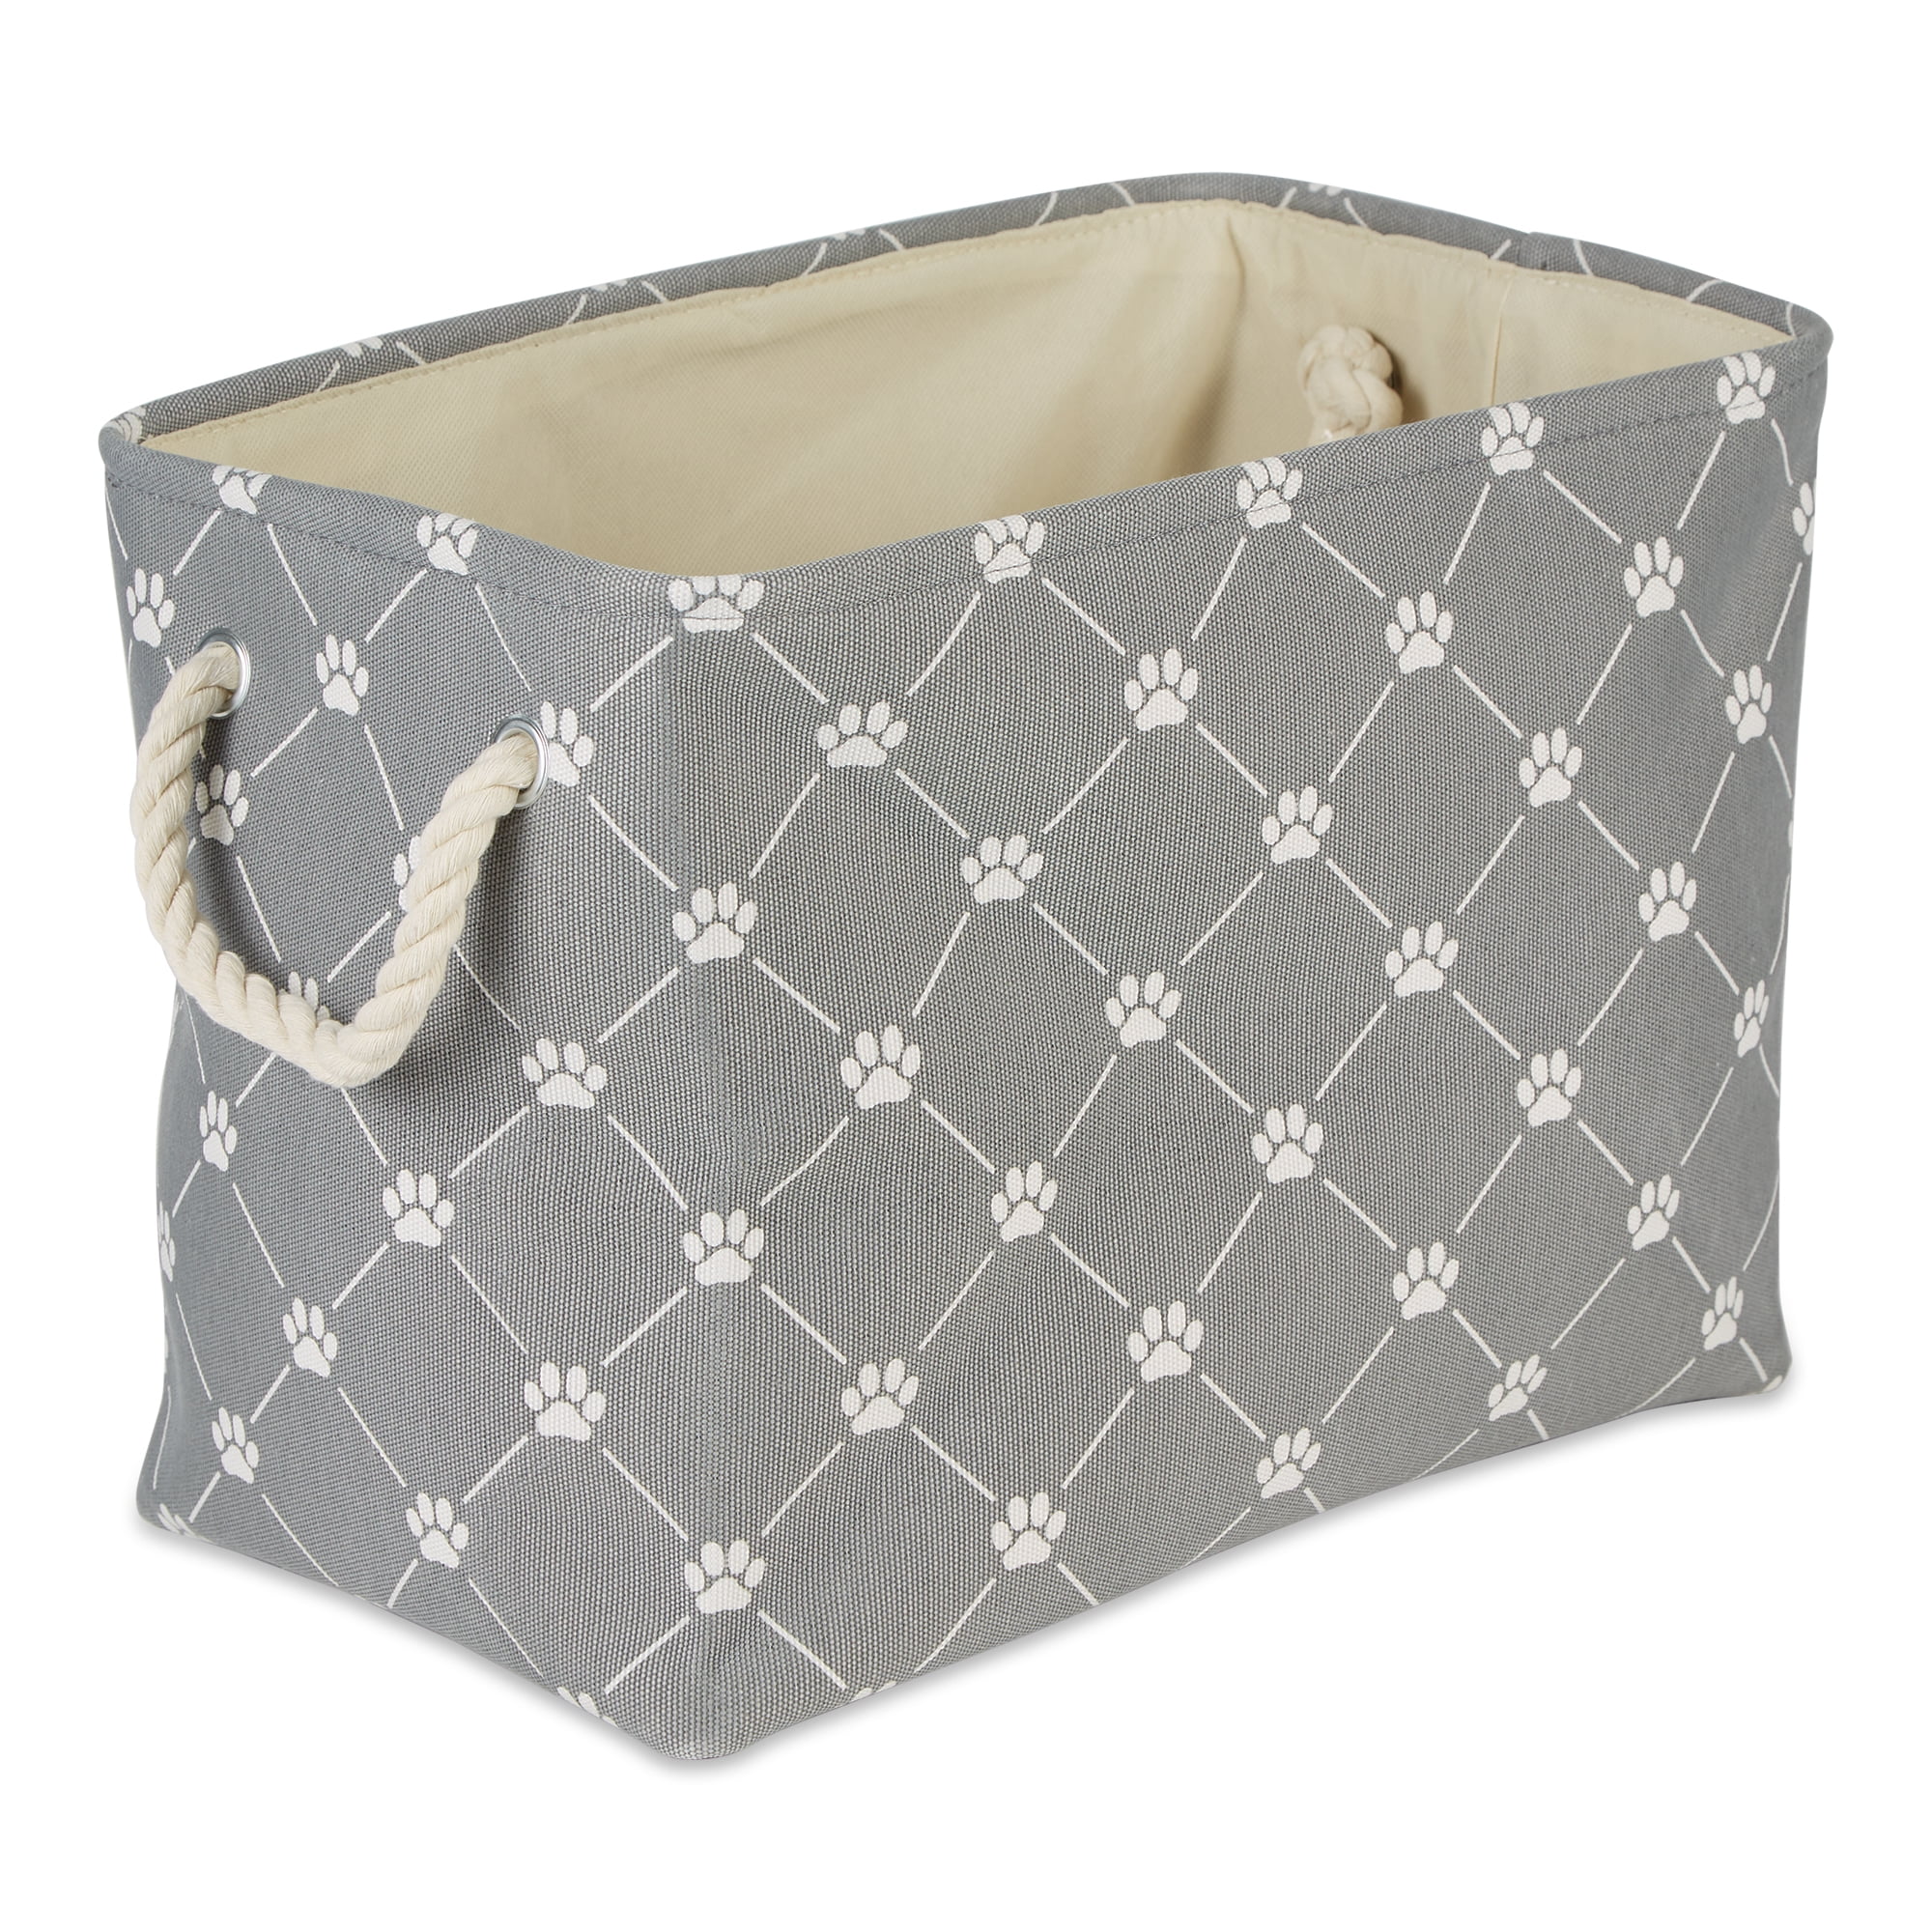 Picture of Design Imports CAMZ14205 Polyester Trellis Paw Rectangle Pet Bin, Gray - Small